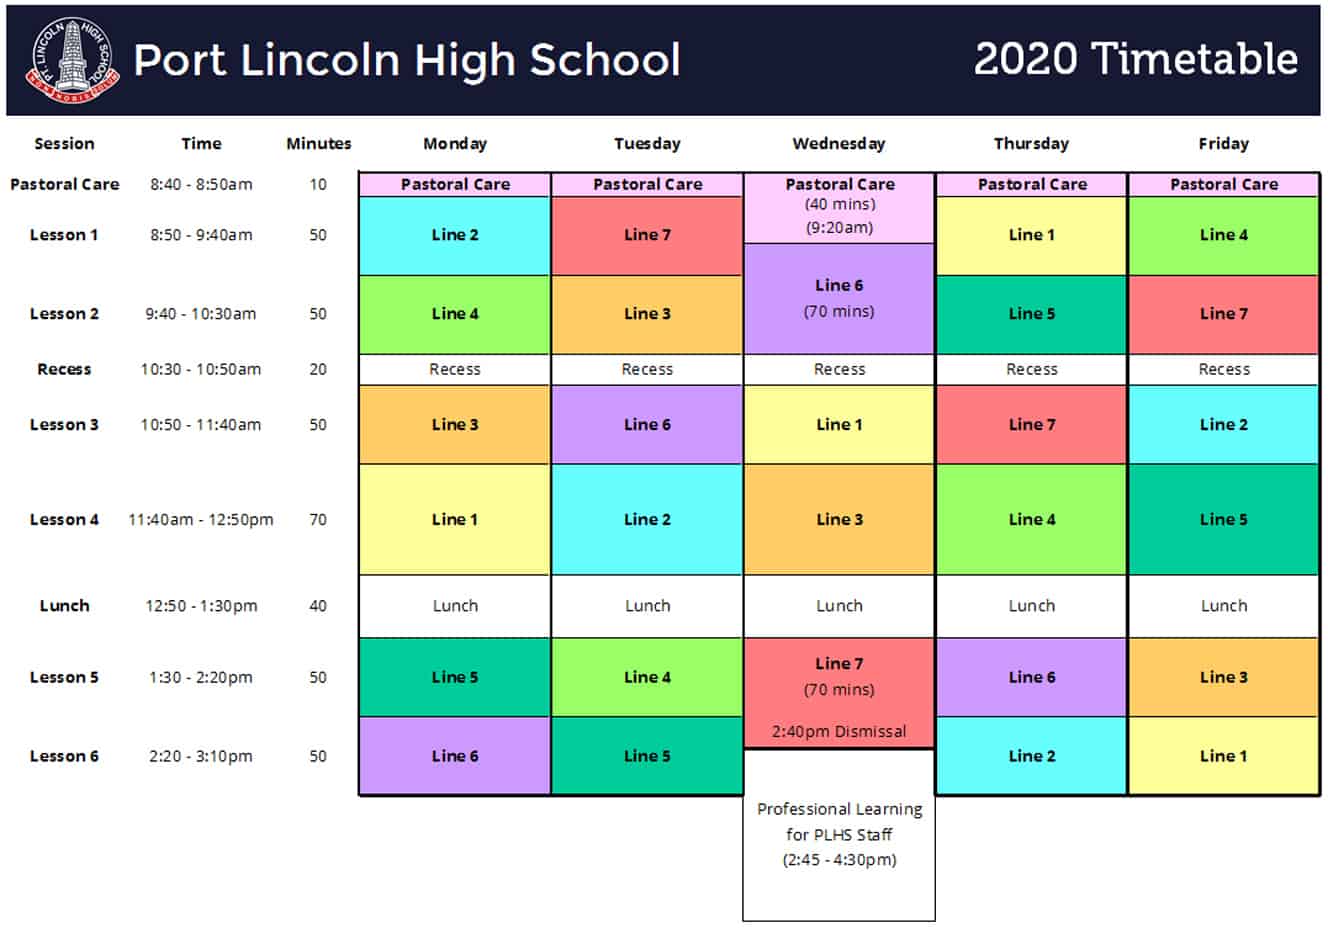 New Plhs Timetable For 2020 And Beyond Port Lincoln High School